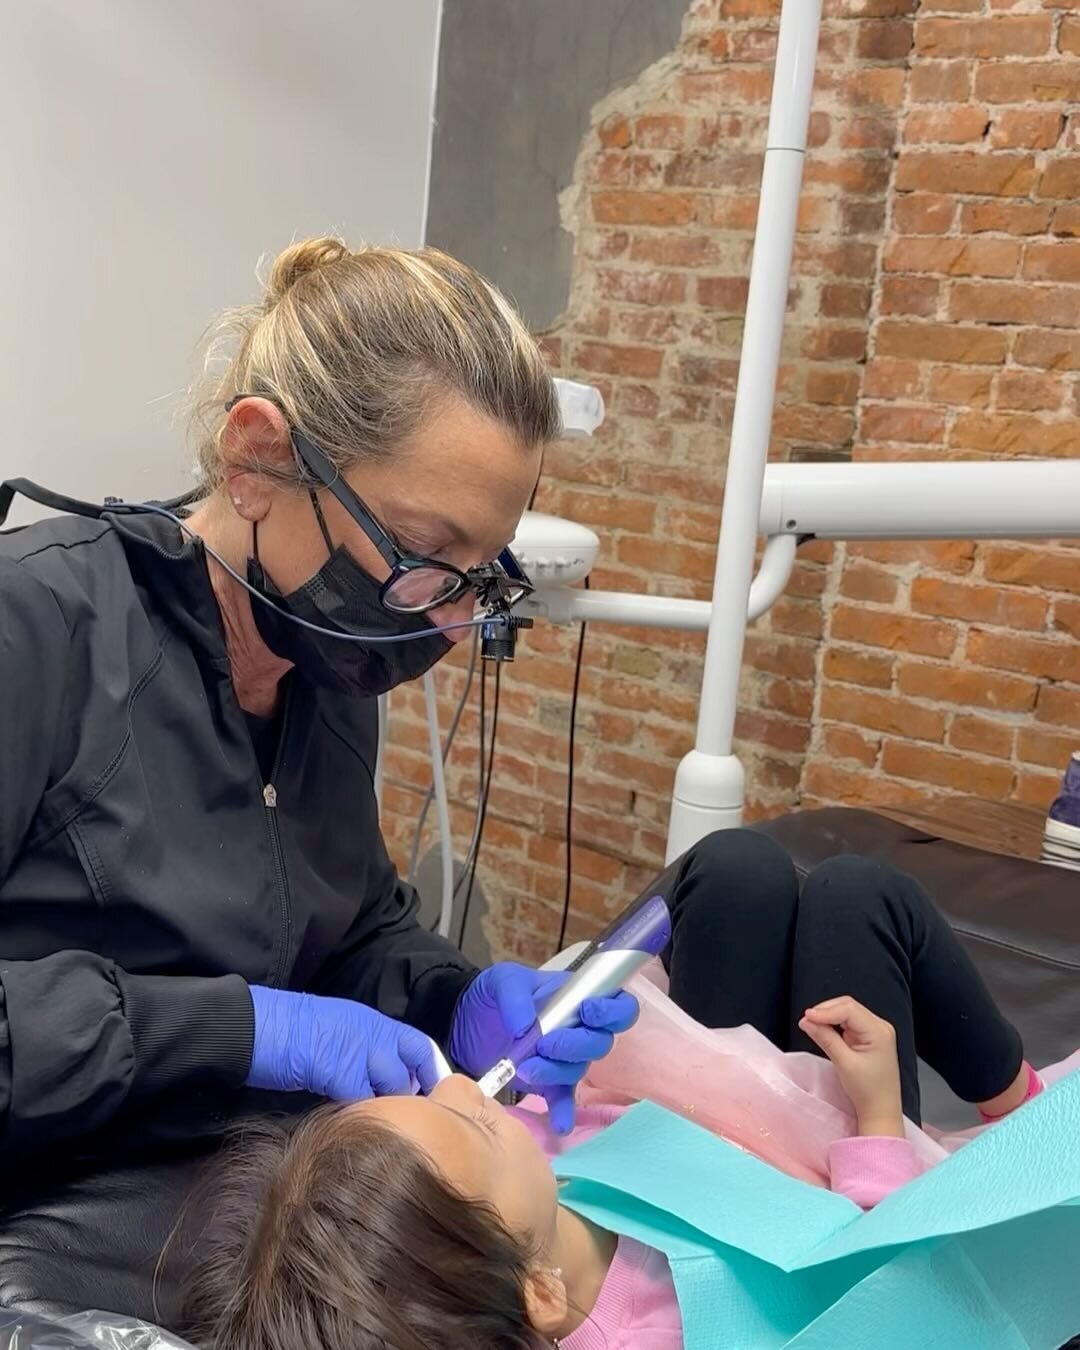 🎊 It&rsquo;s spring break in the #ChagrinValley, which means a lot of you are off on adventures enjoying the sunshine all over the world! 🏝️

Throwback to a couple of weeks ago, when Dr. Santos&rsquo; little ones were in for their cleanings in prep